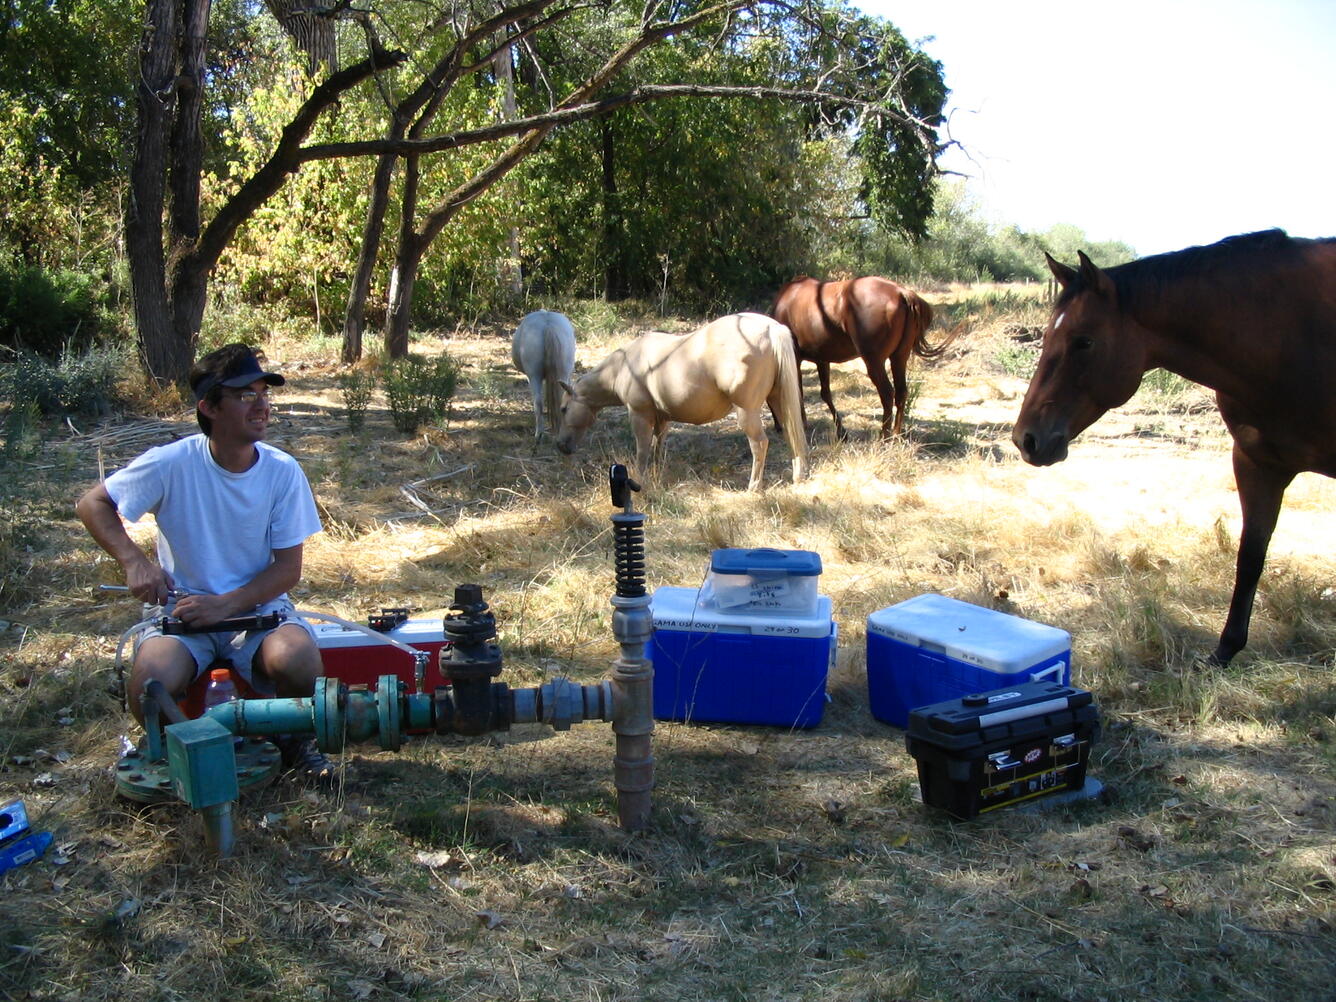 a man sitting in a field in front of a groundwater well with 3 coolers. A curious horse is standing nearby.